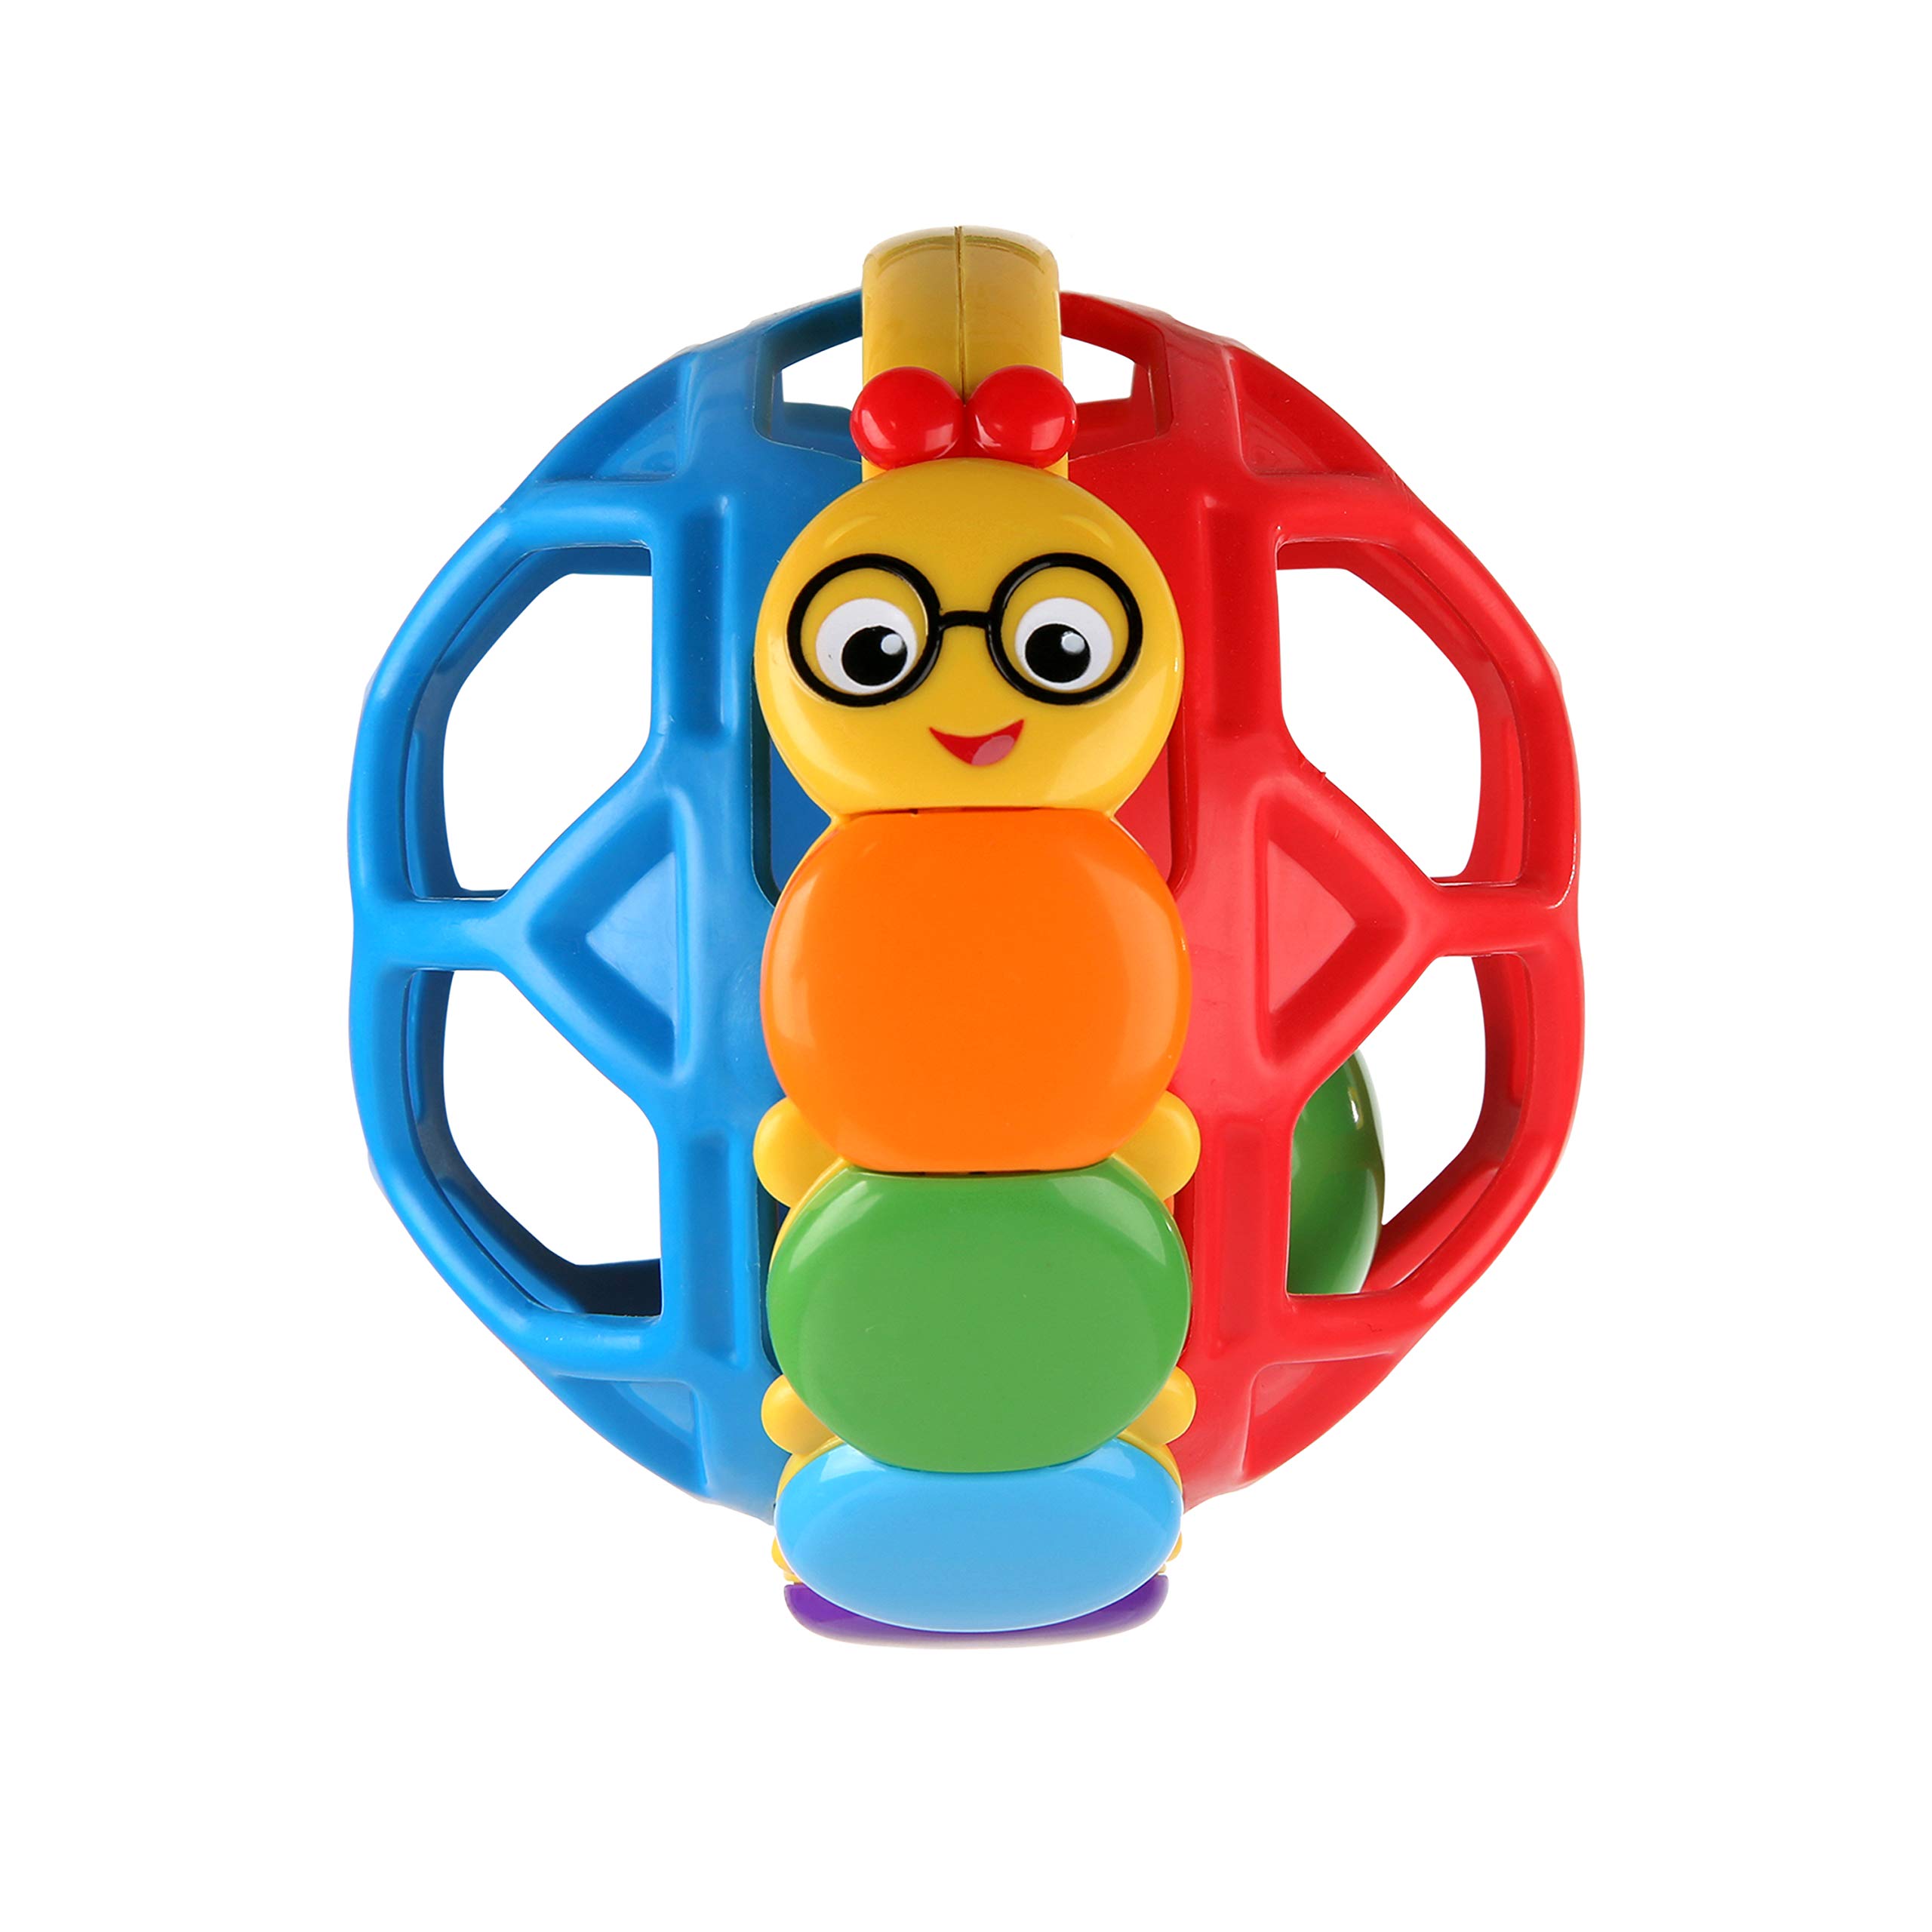 Baby Einstein Cal Bendy Ball Rattle Toy, Ages 3 months +